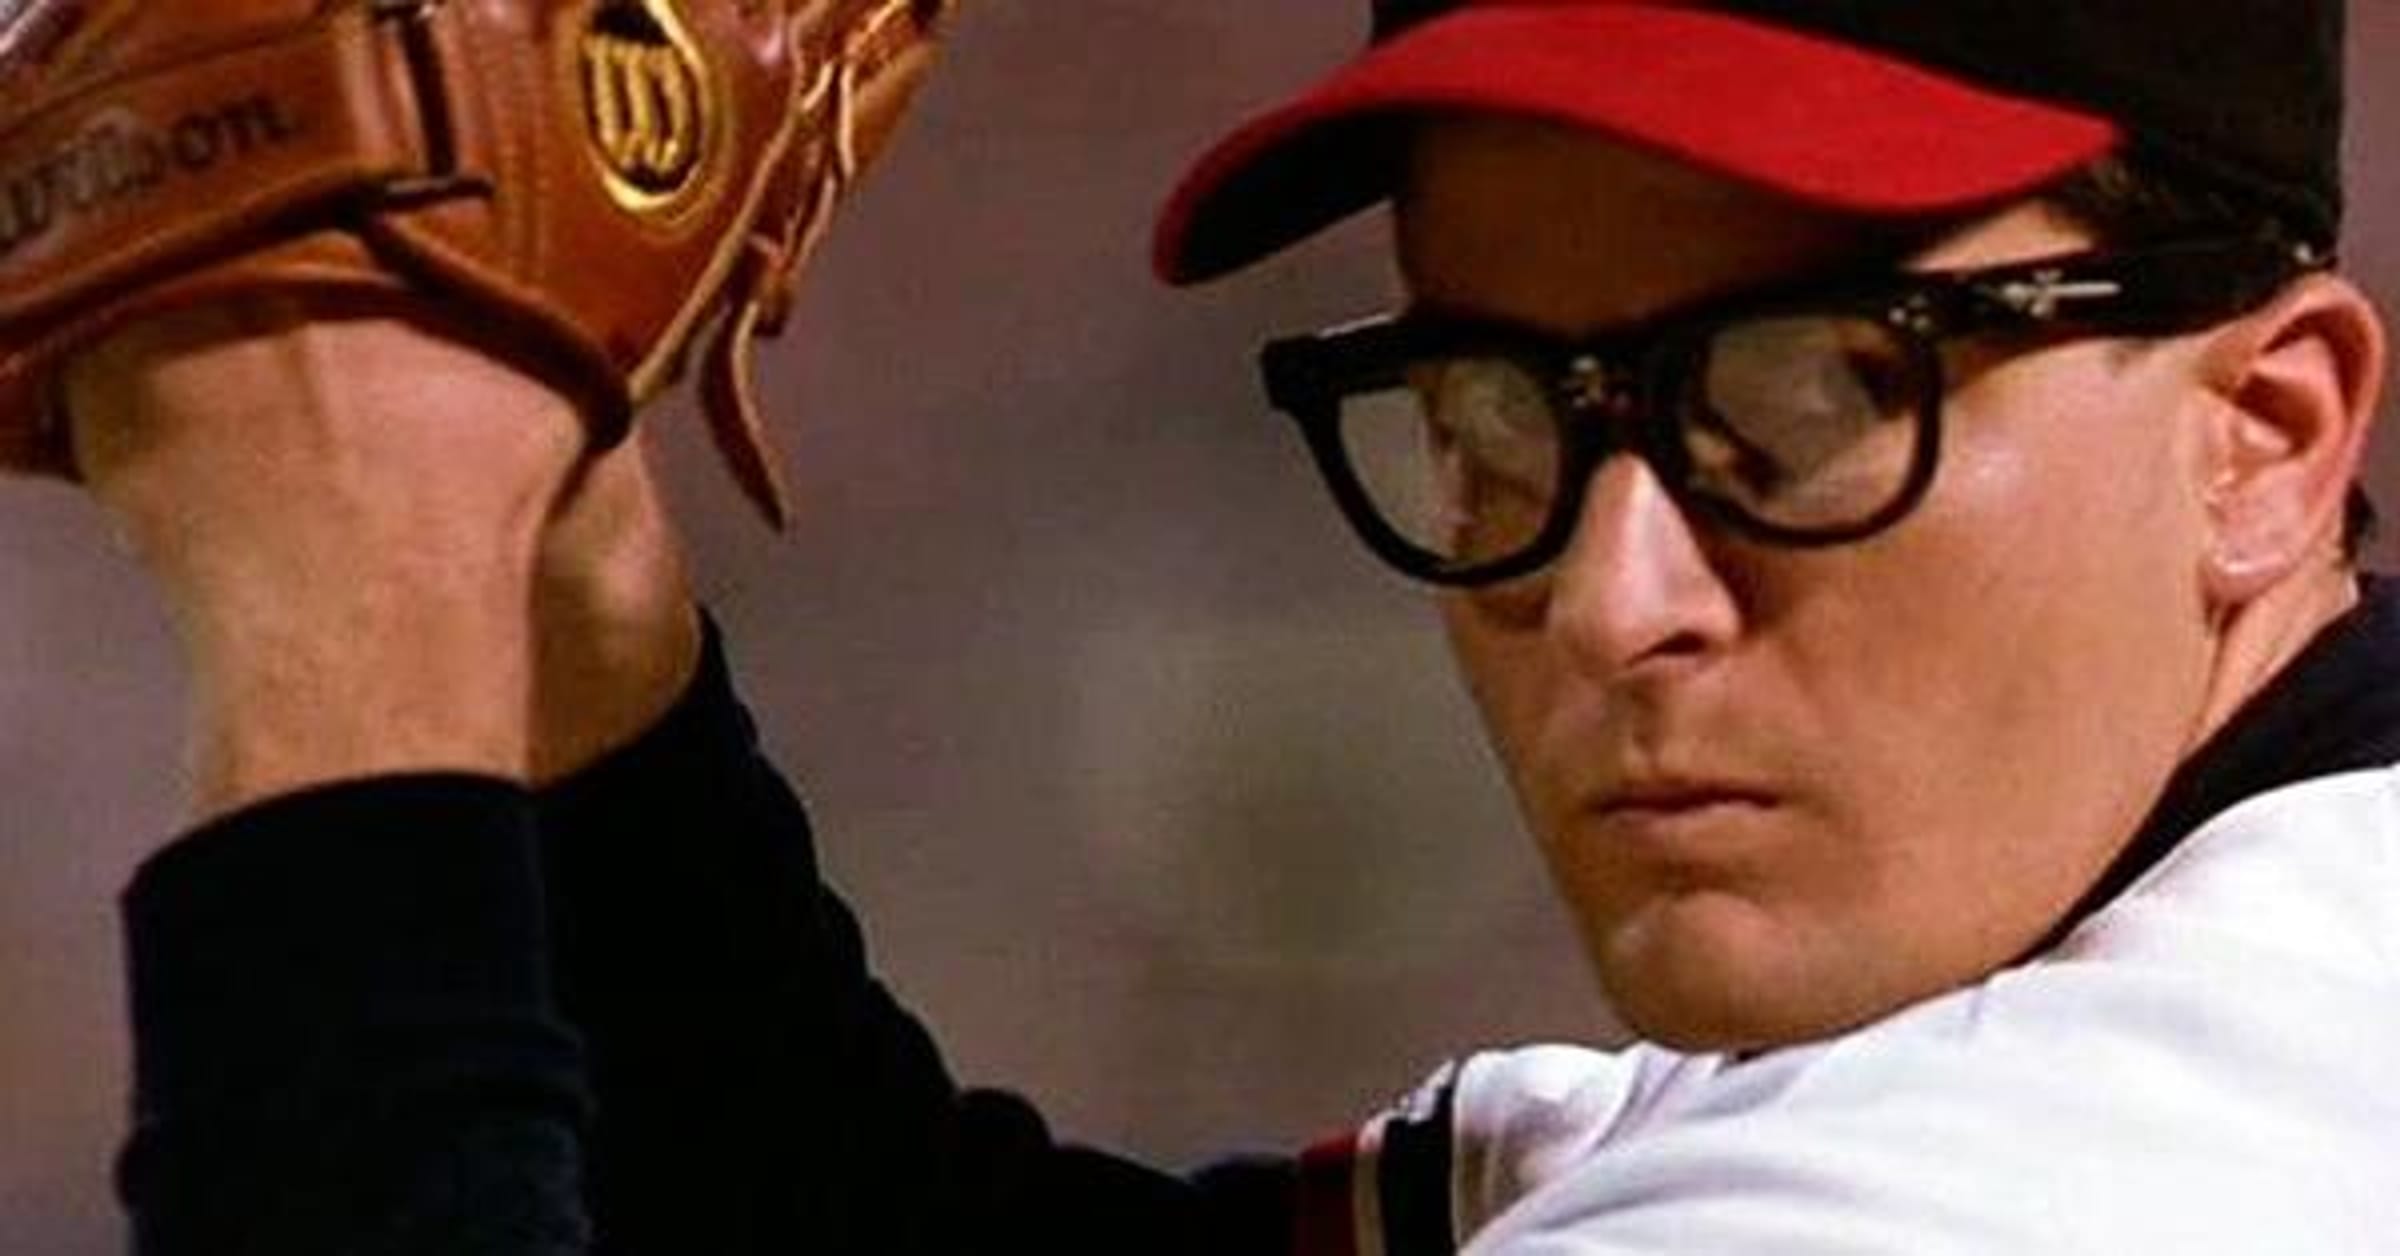 The Greatest Baseball Player Characters in Film